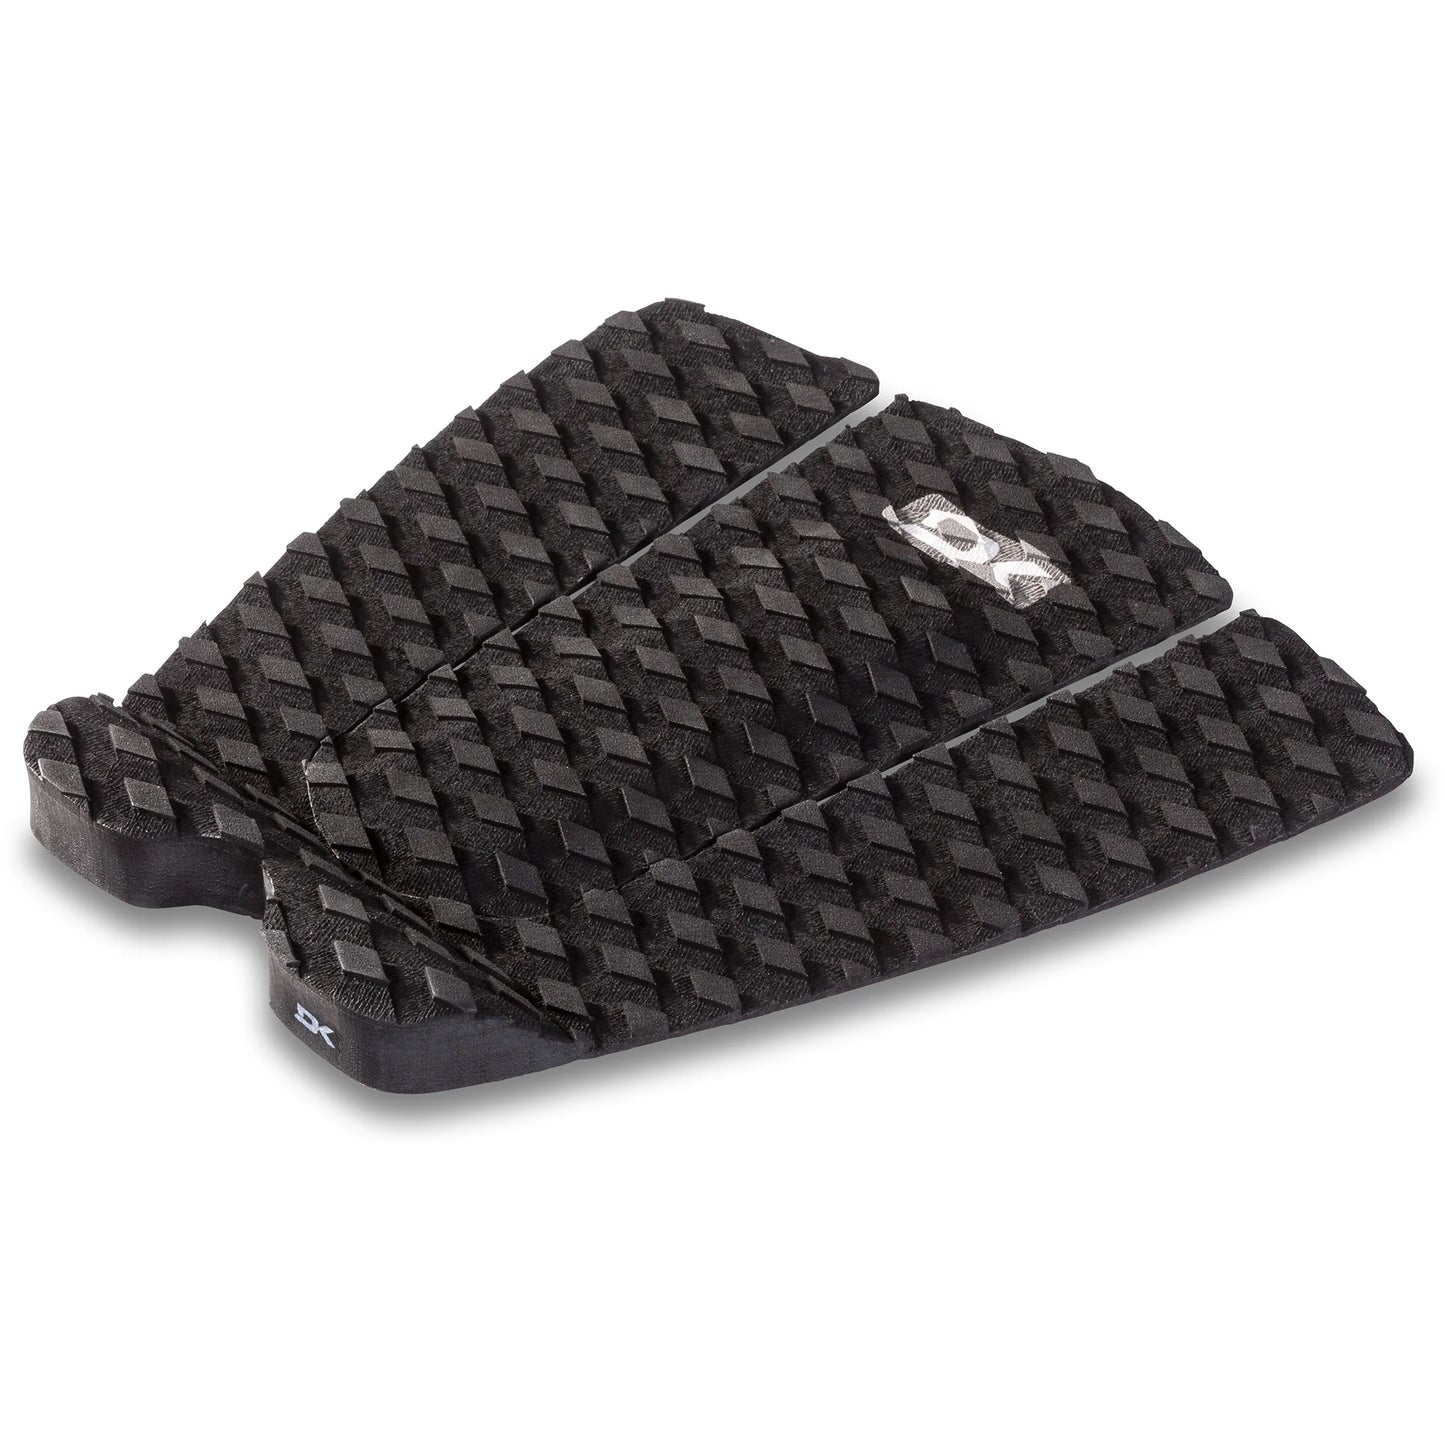 Andy Irons Pro Surf Traction Pad Black